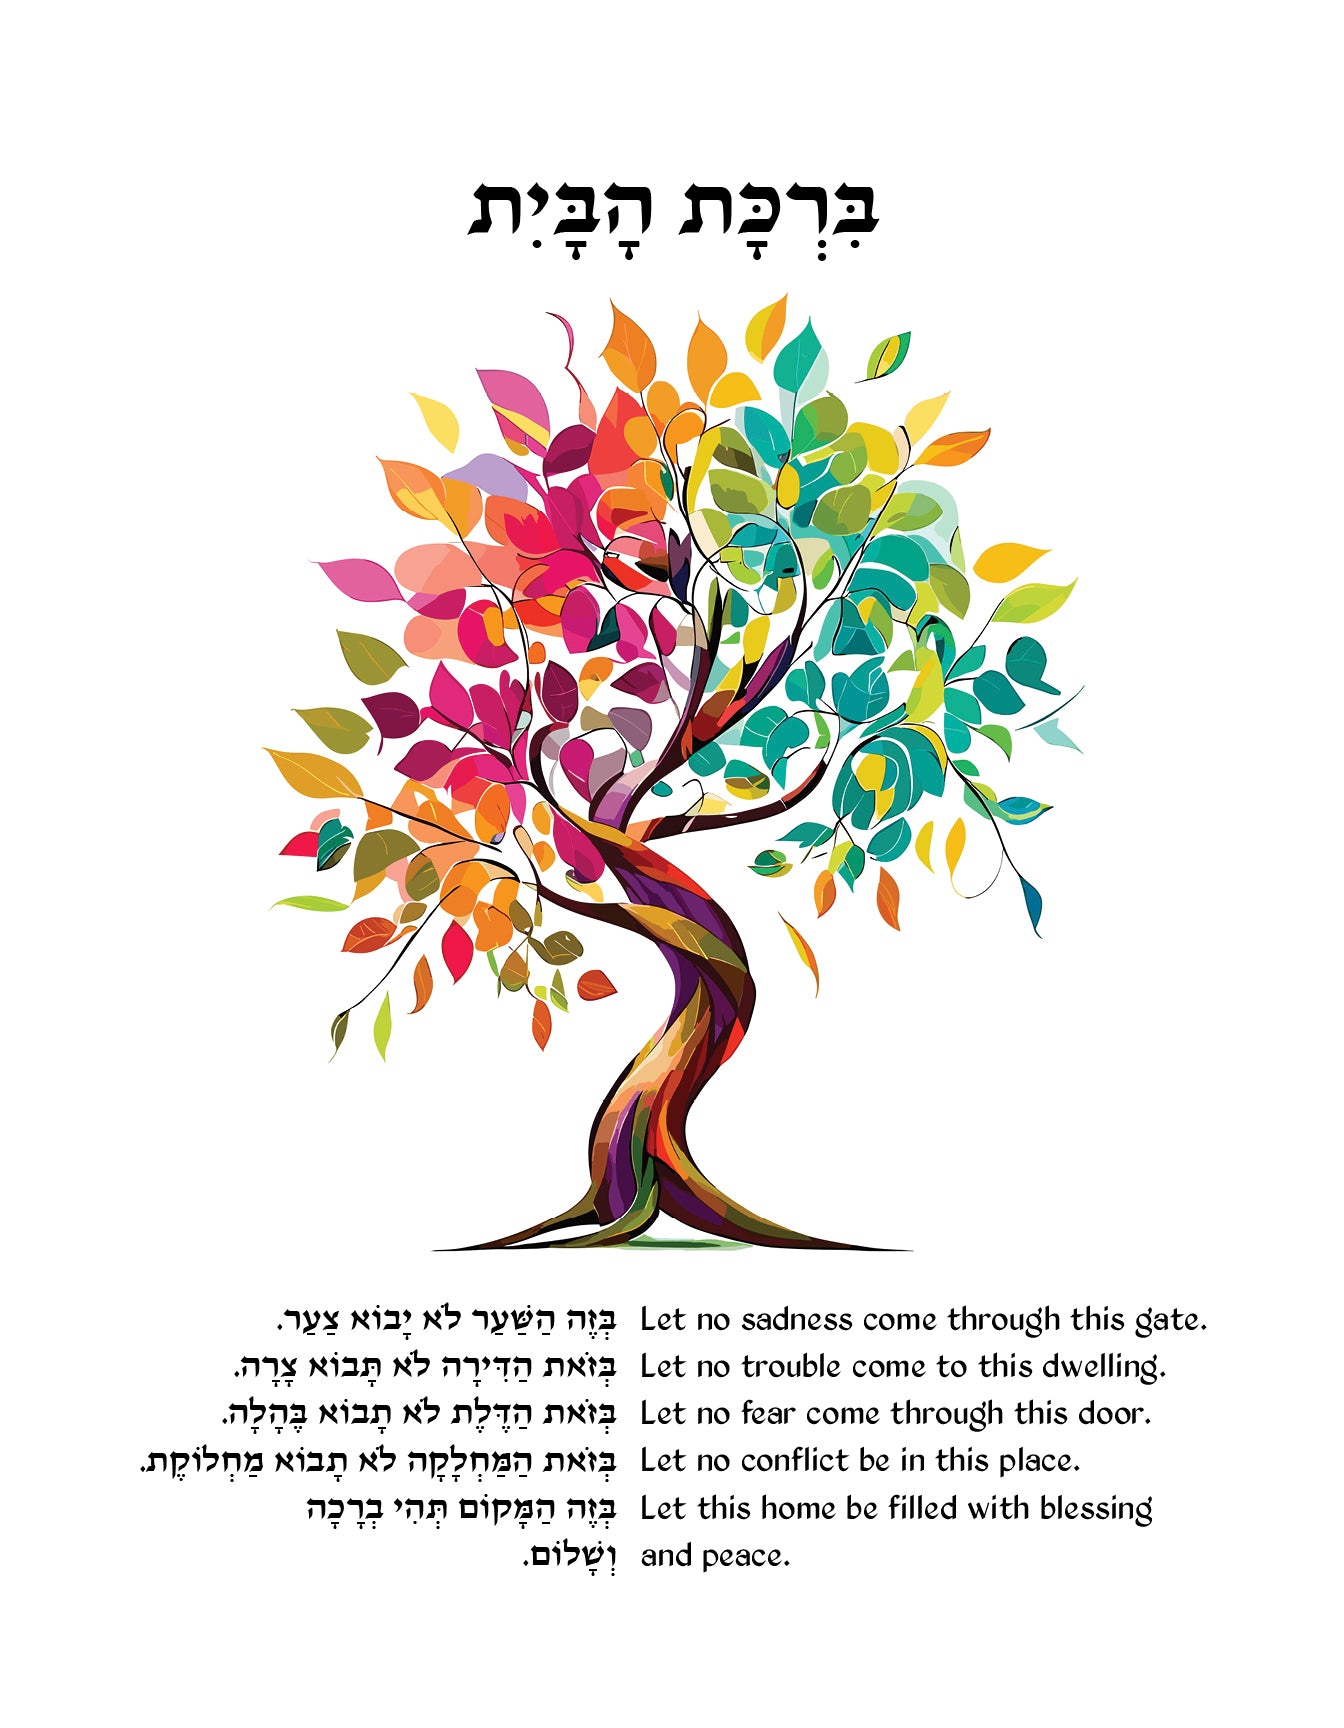 Multicolored Twisted Tree - Jewish Home Blessing